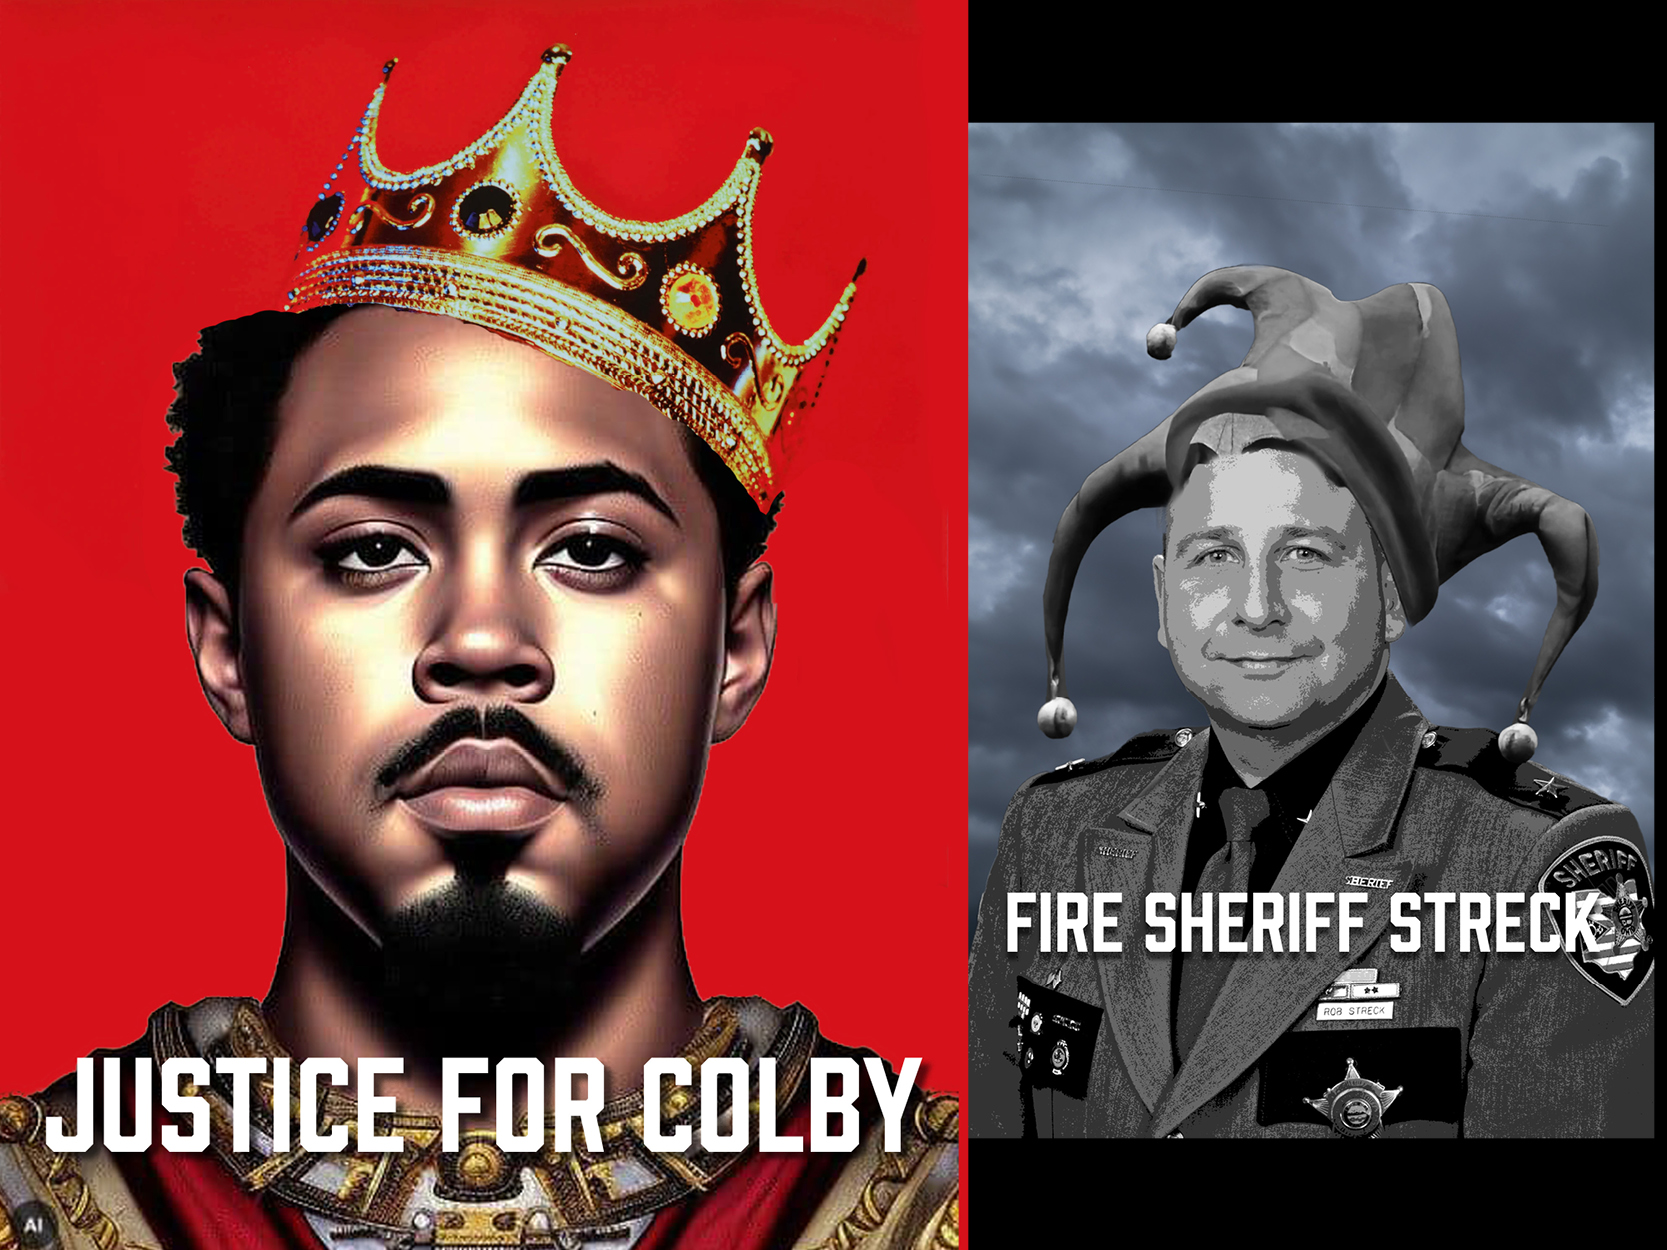 Justice for Colby Ross, Fire Sheriff Streck